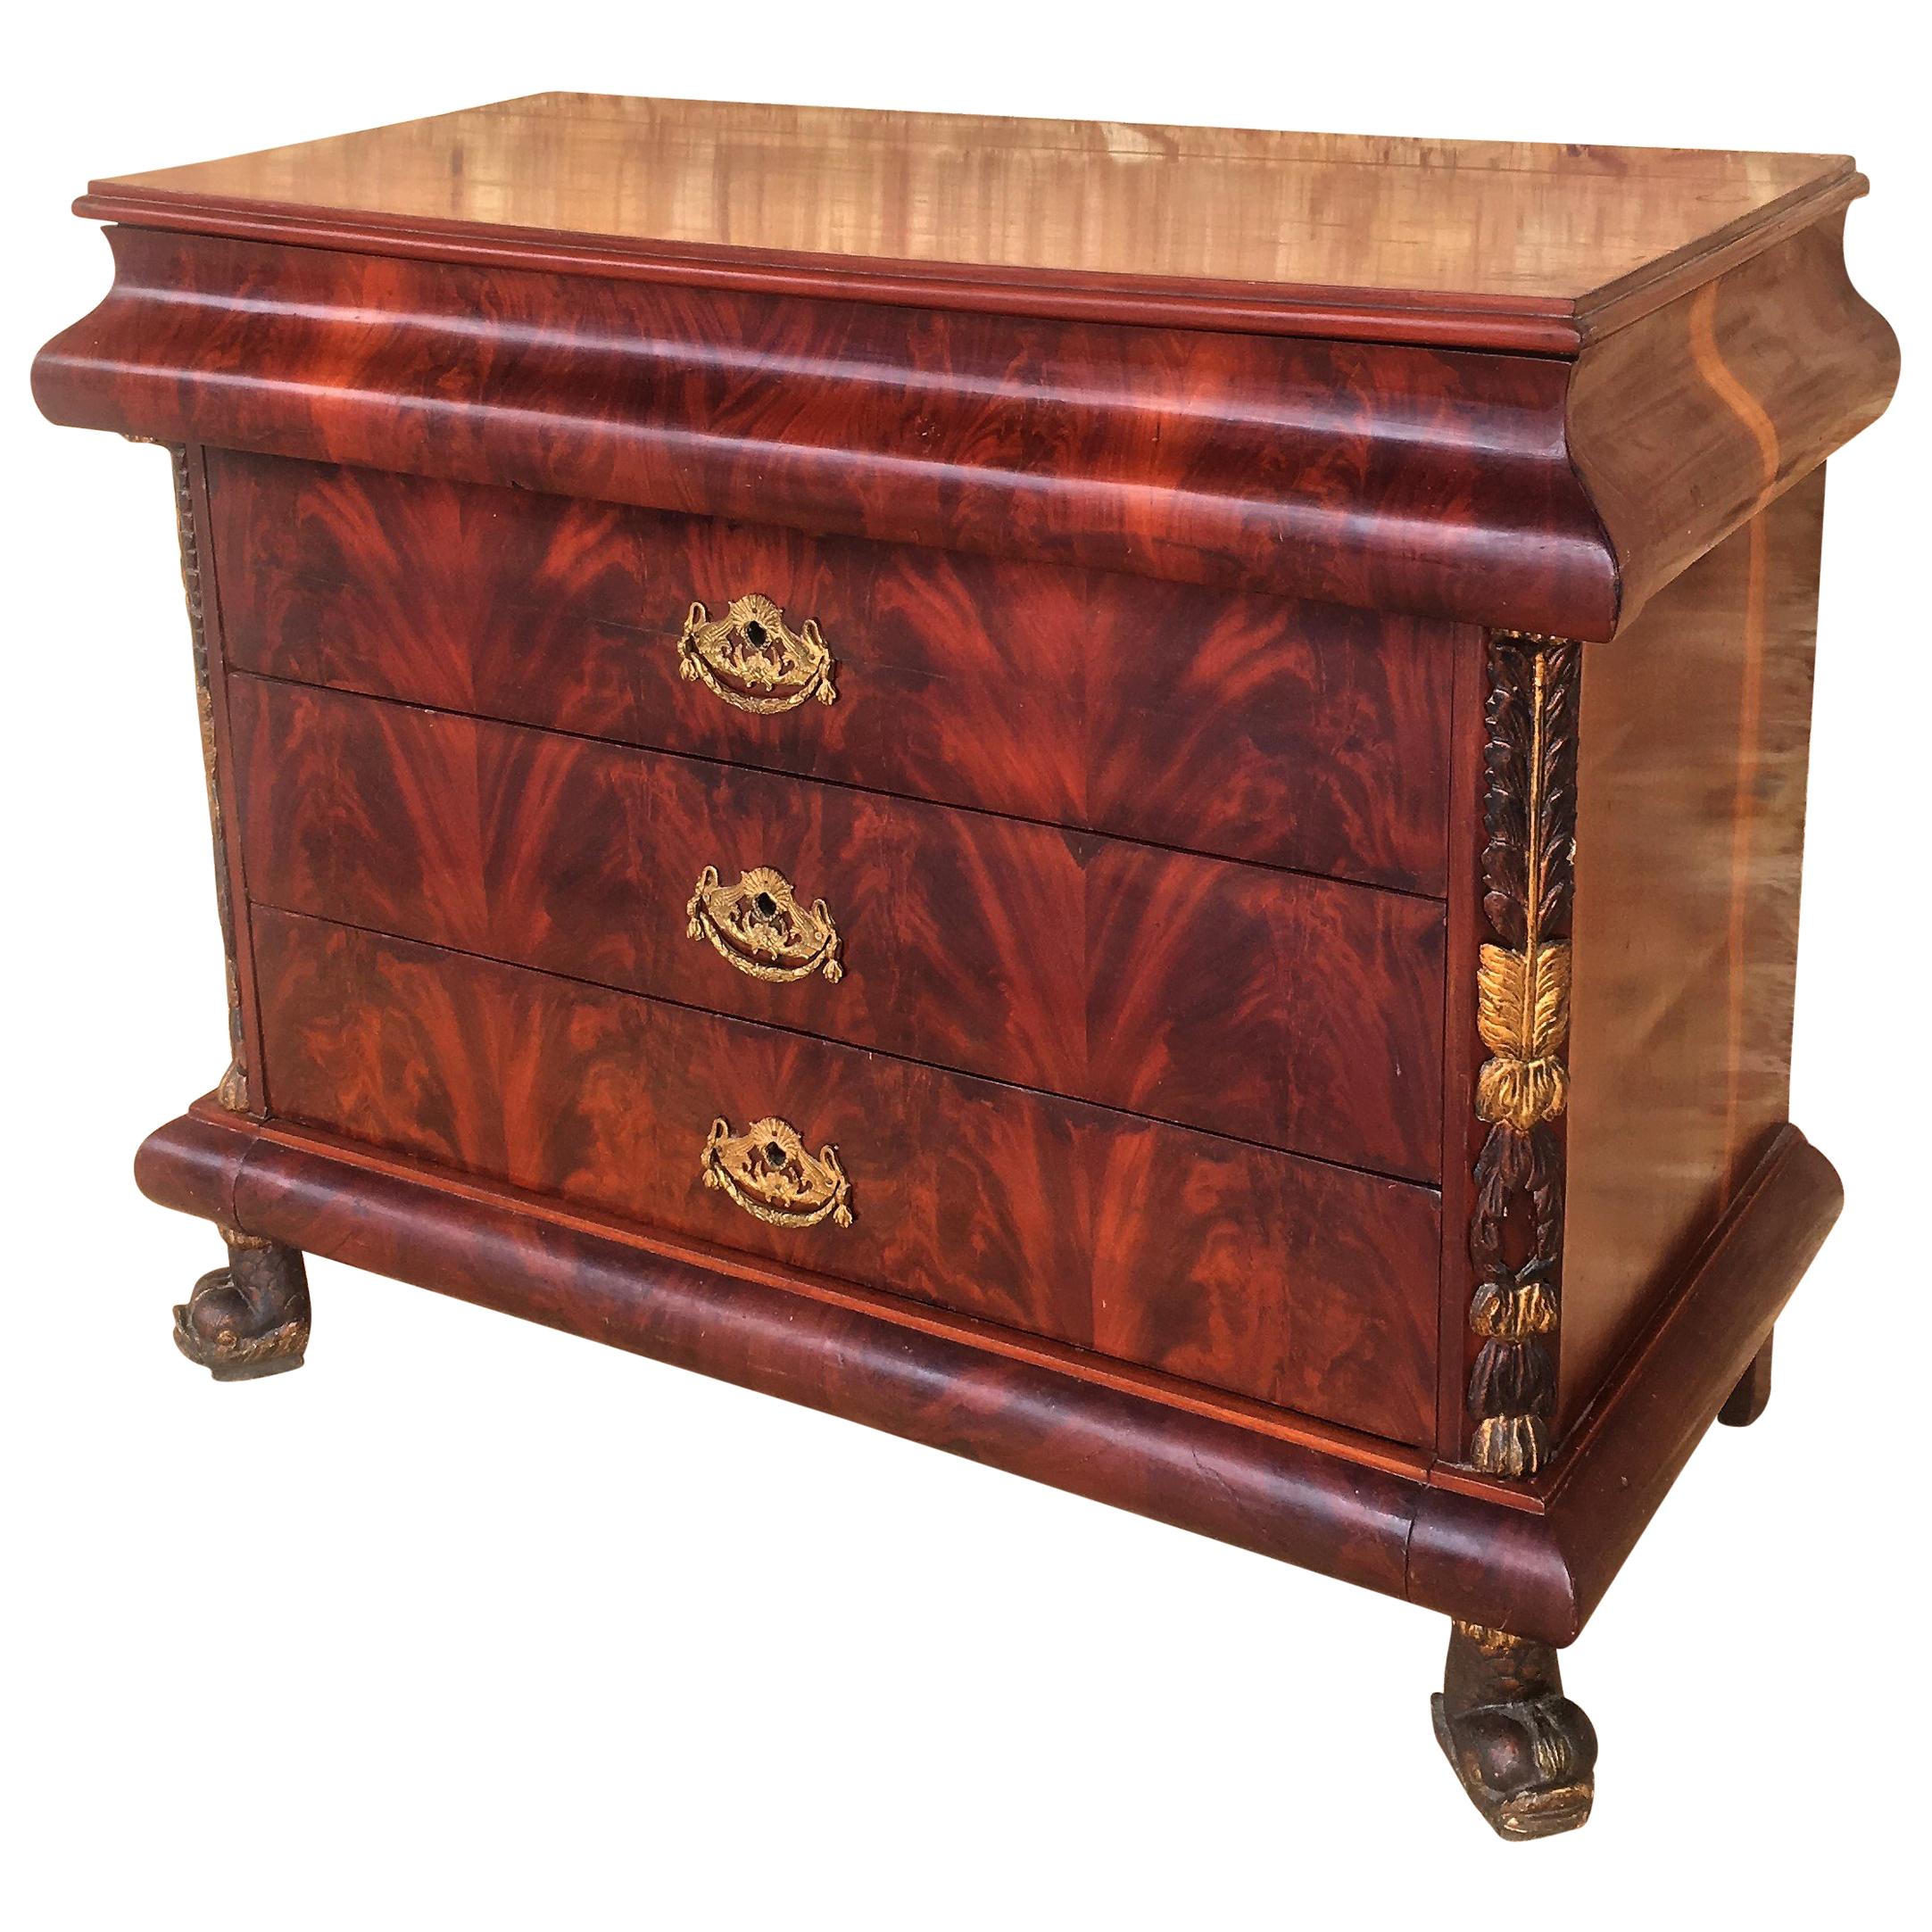 1830s French Empire Mahogany Chest with Four Drawers and Gilded Edges, Commode